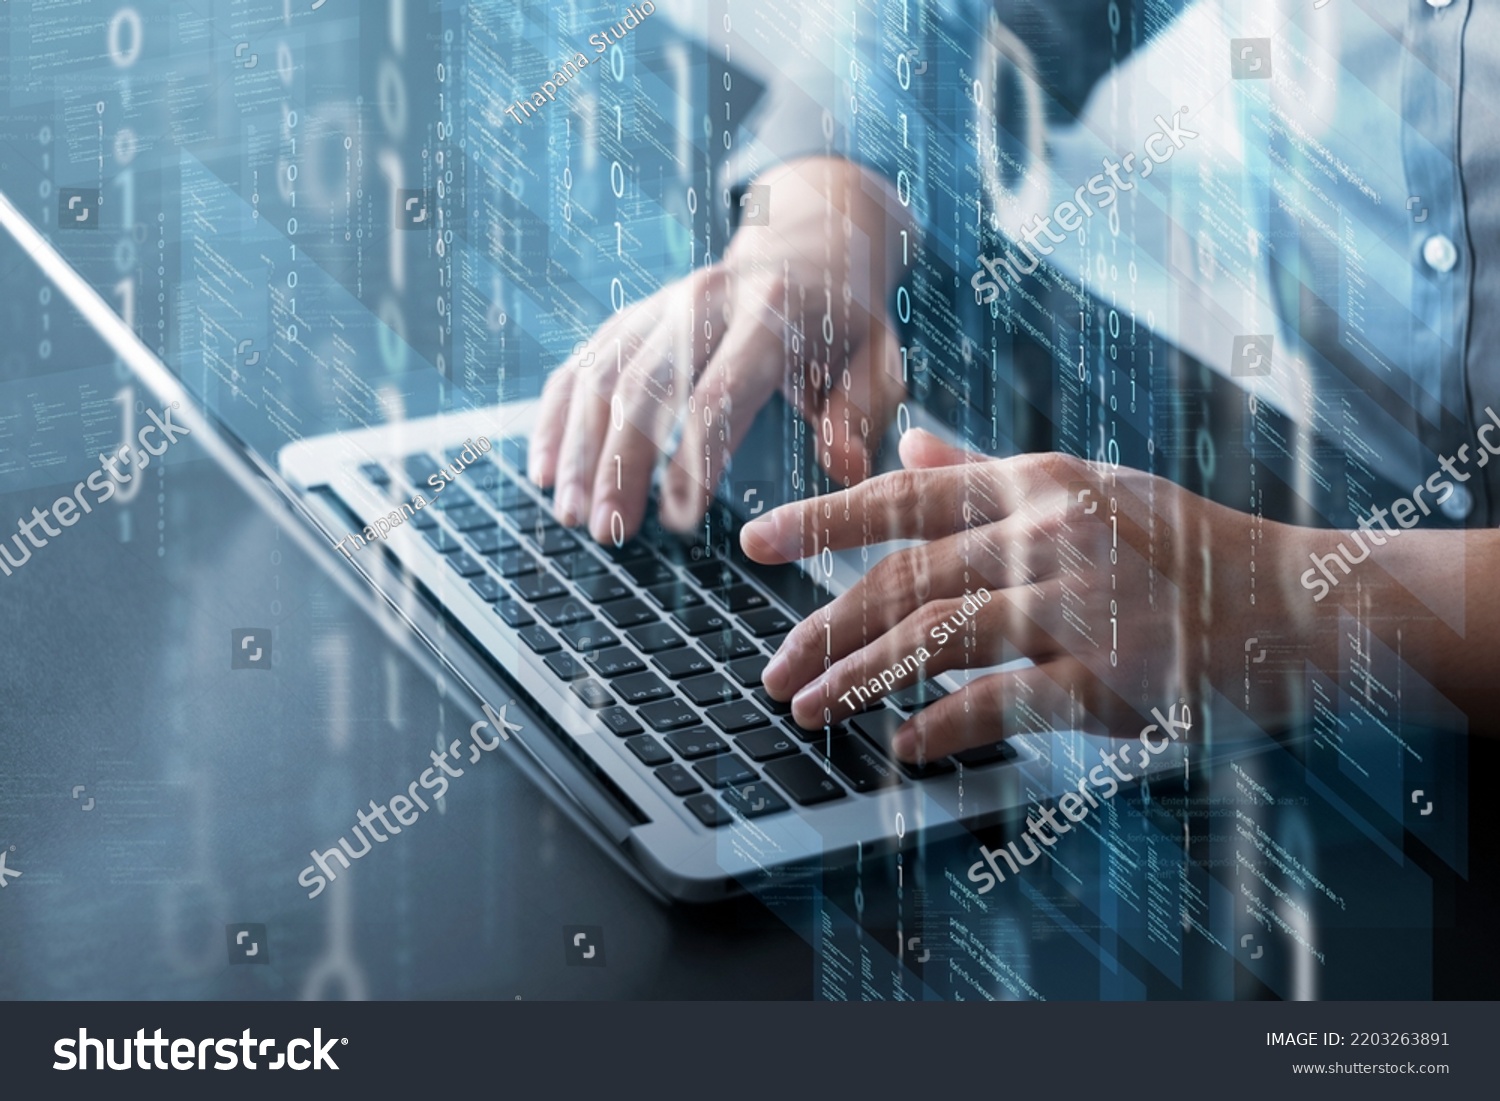 Professional IT programmers working on websites and social security, software developers typing computer code for internet digital security. #2203263891